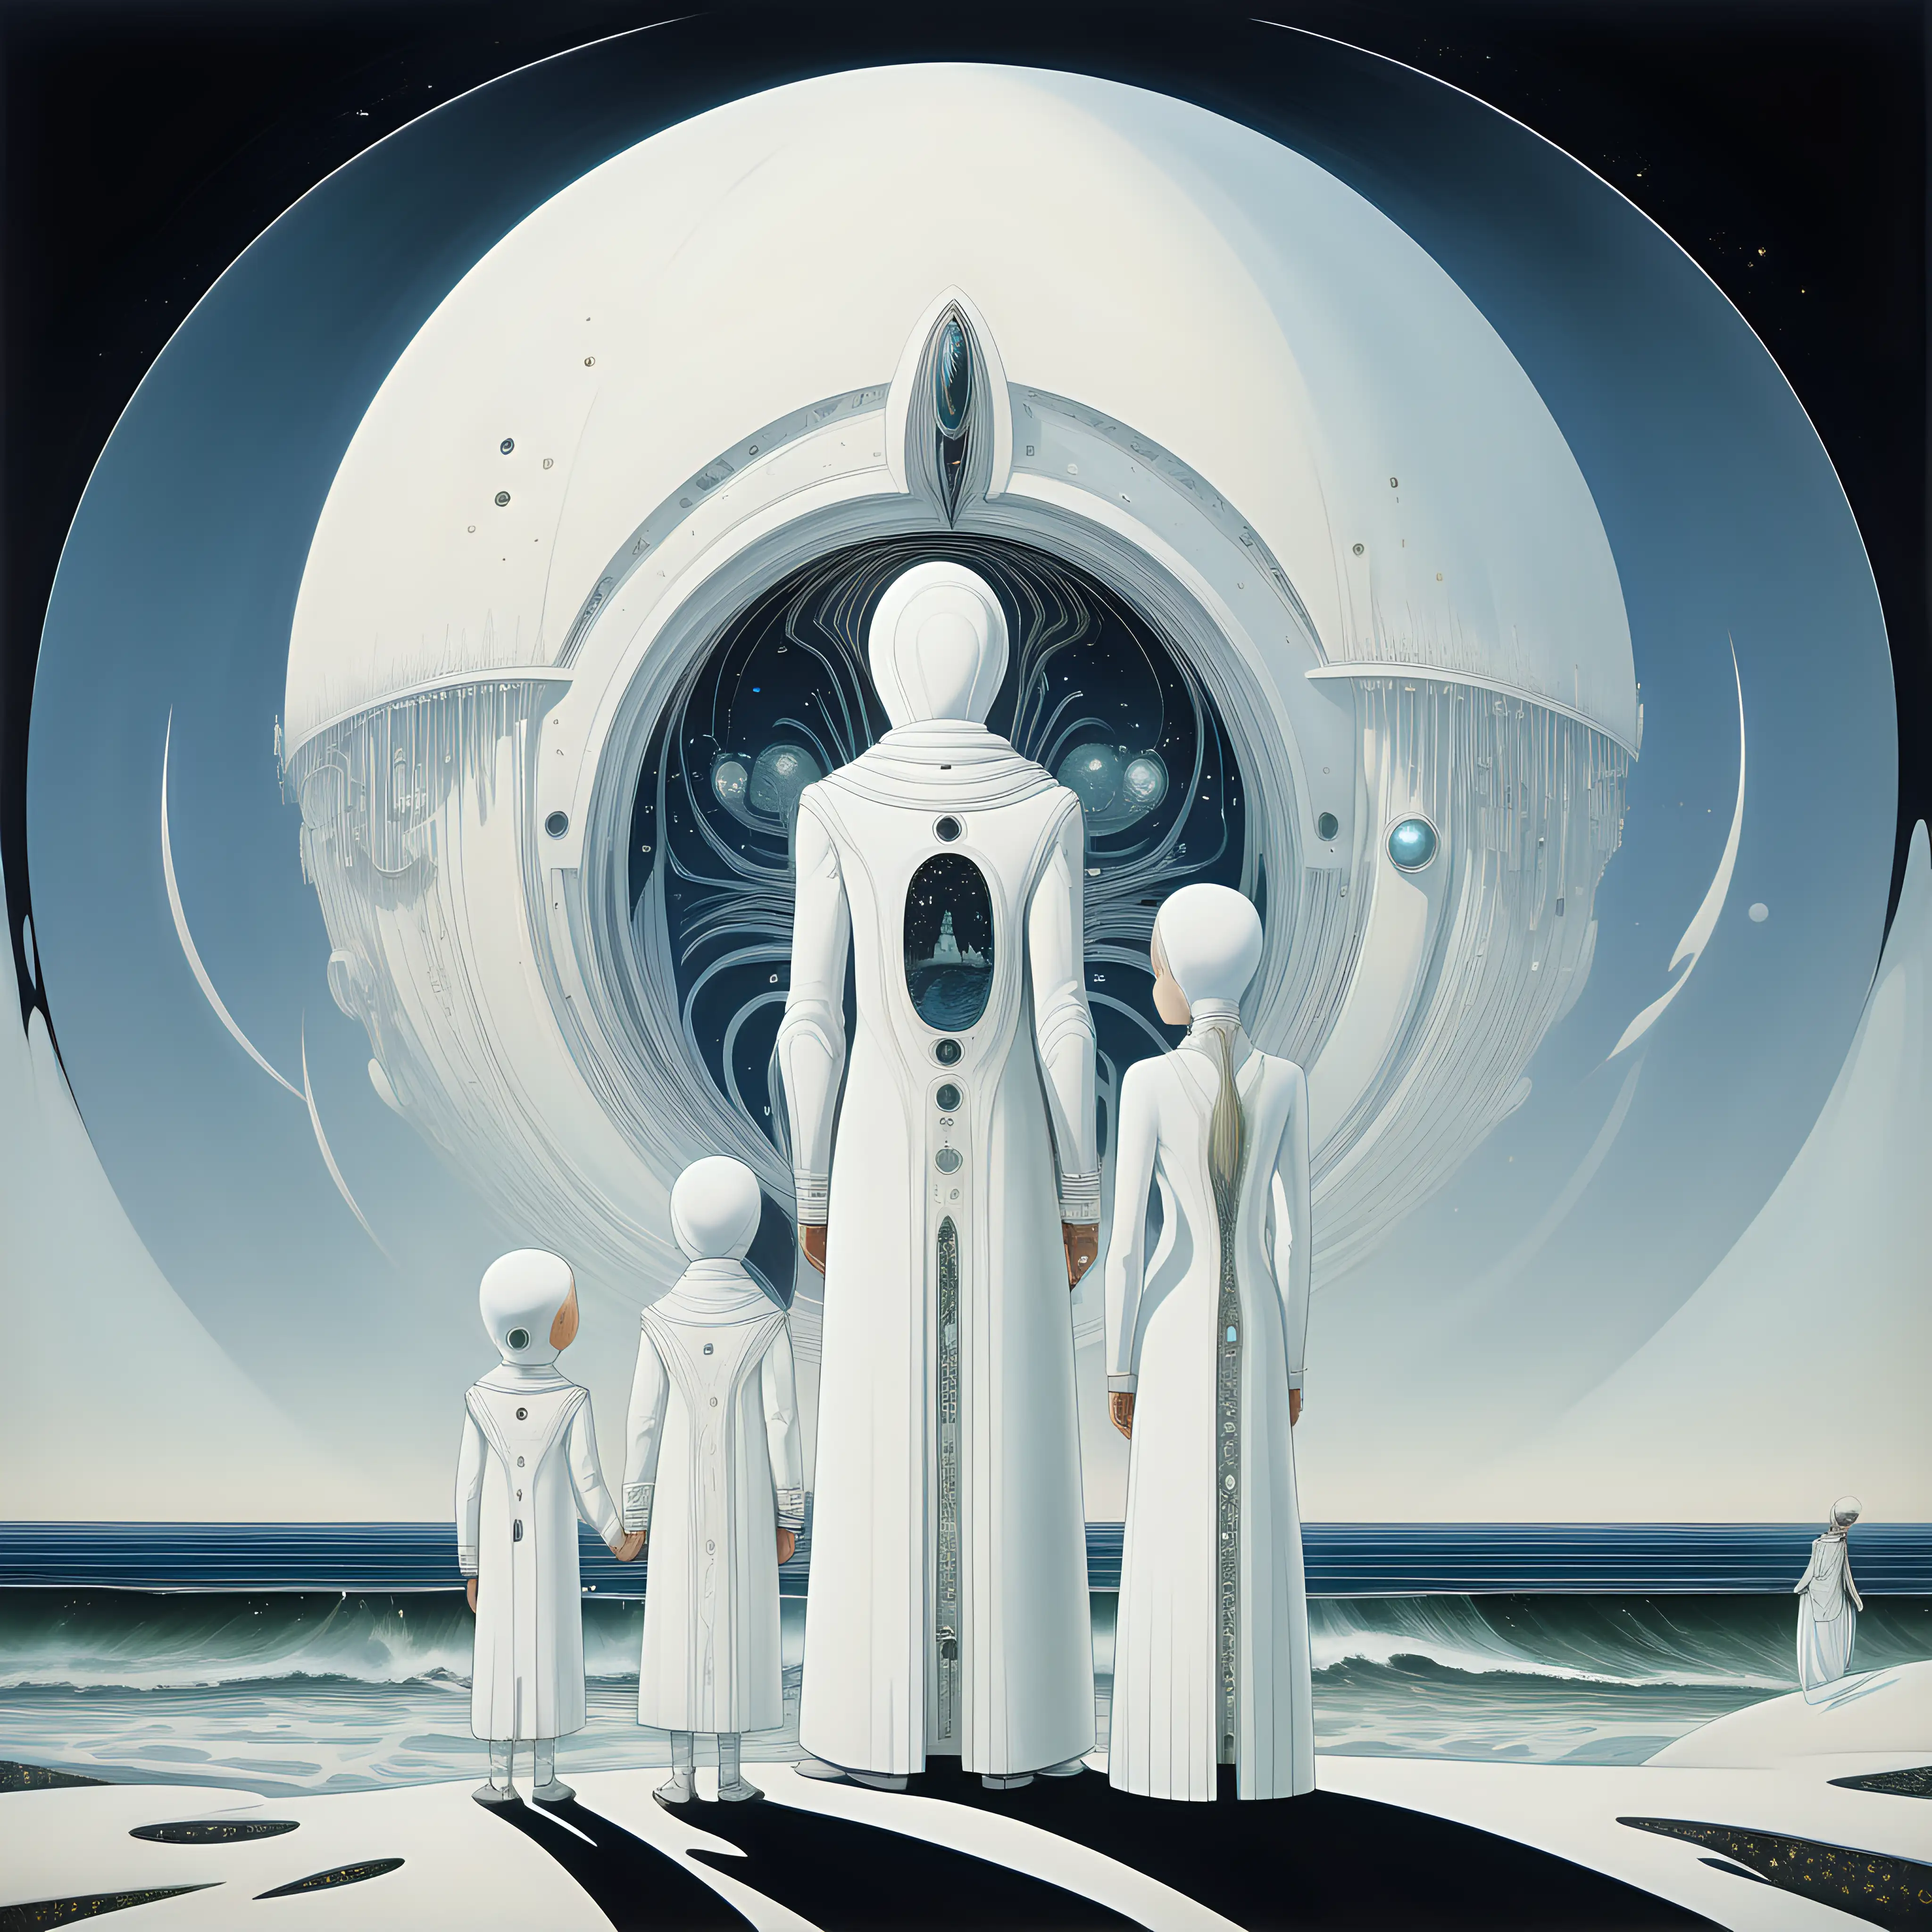 Futuristic Family Serenity Ethereal Seascape in Kay Nielsen Style